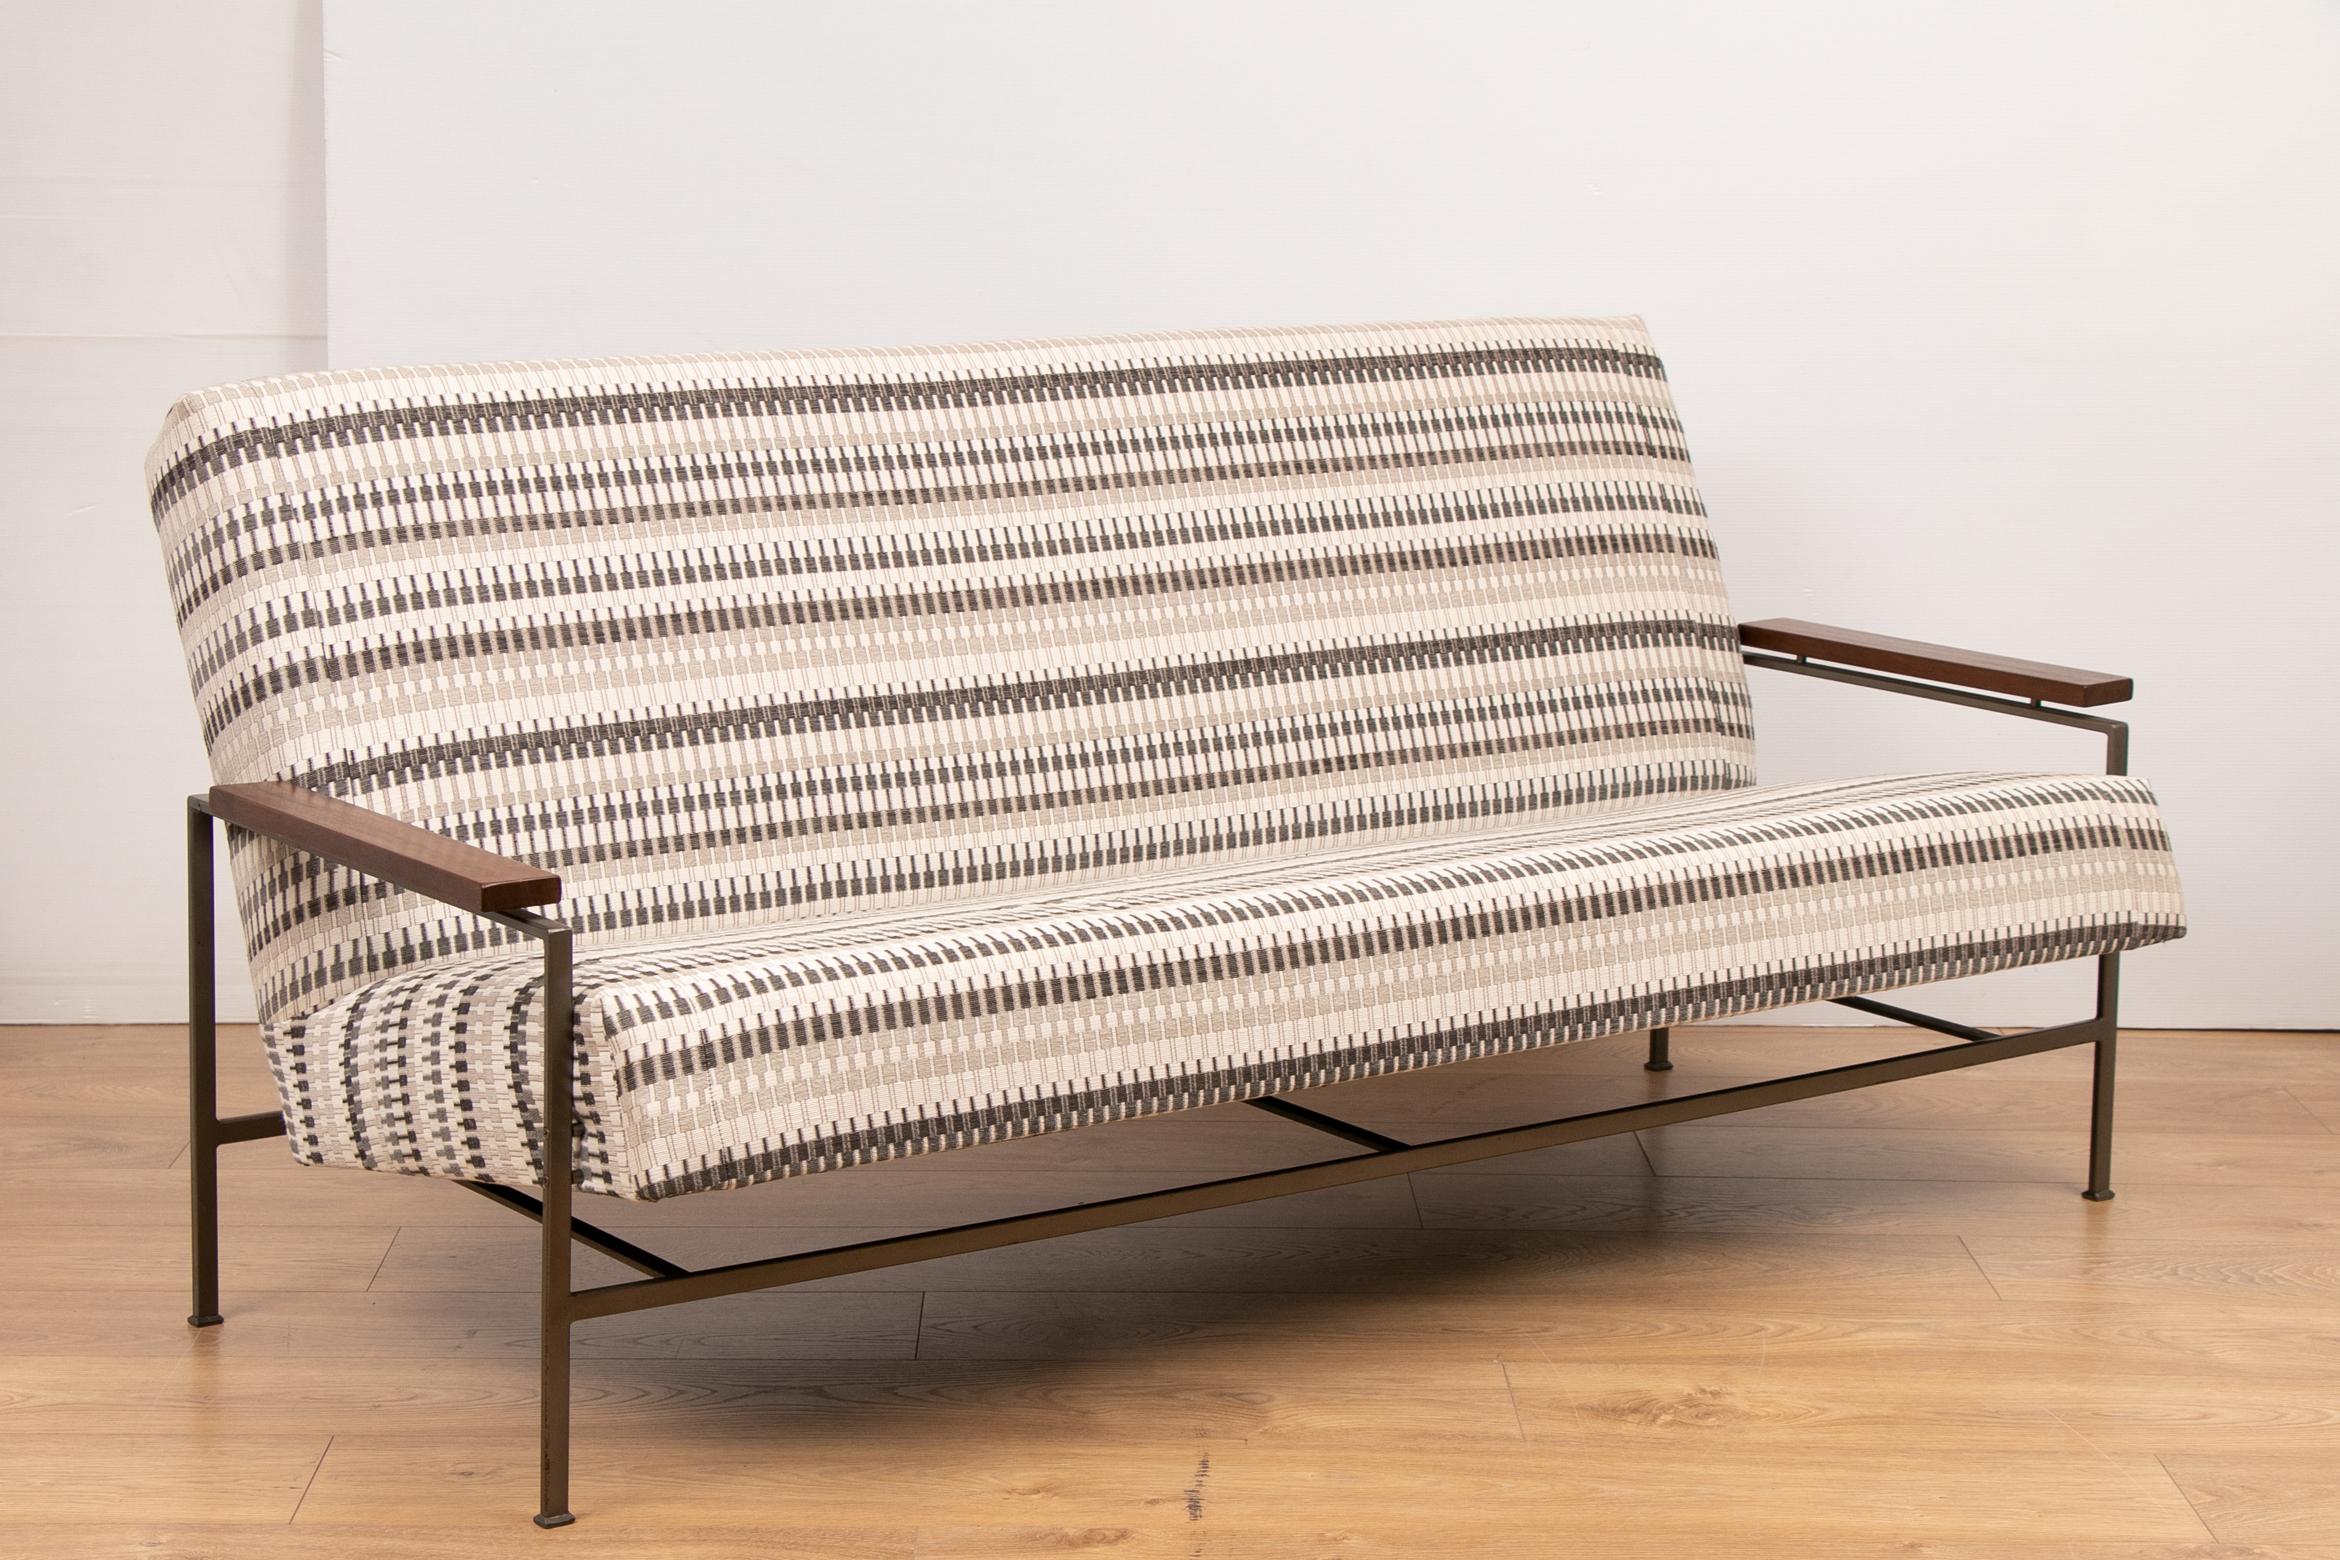 1960s, midcentury, Minimalist, modern, designed sofa, with two armchairs and matching coffee table designed by Rob Parry and manufactured for Gelderland in the Netherlands.

This is an early design named “Lotus” with a metallic grey steel frame